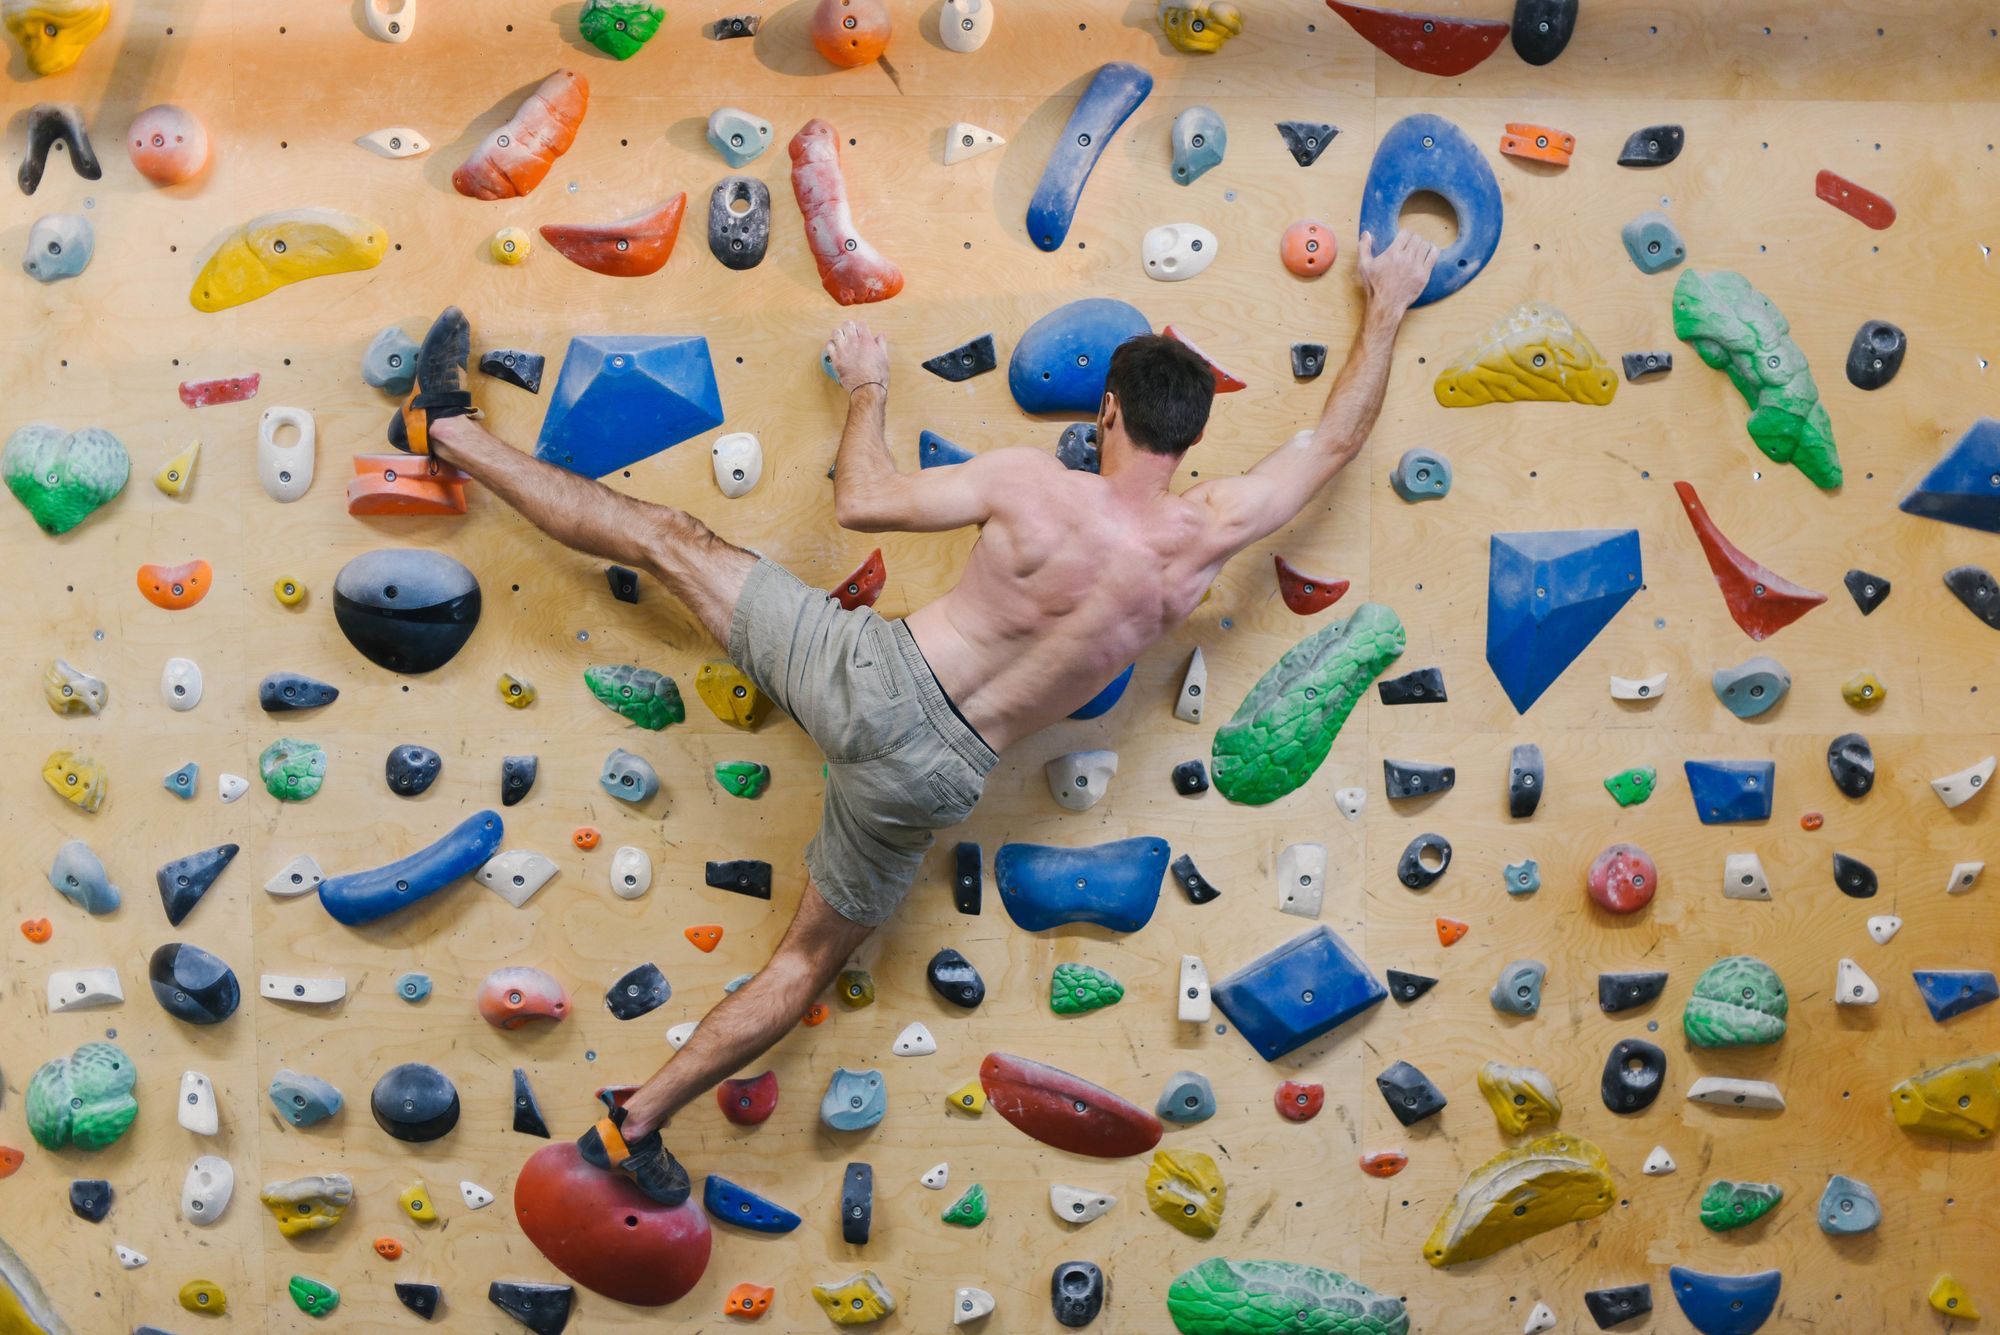 Indoor Rock Climbing for Fitness: Why It's Effective